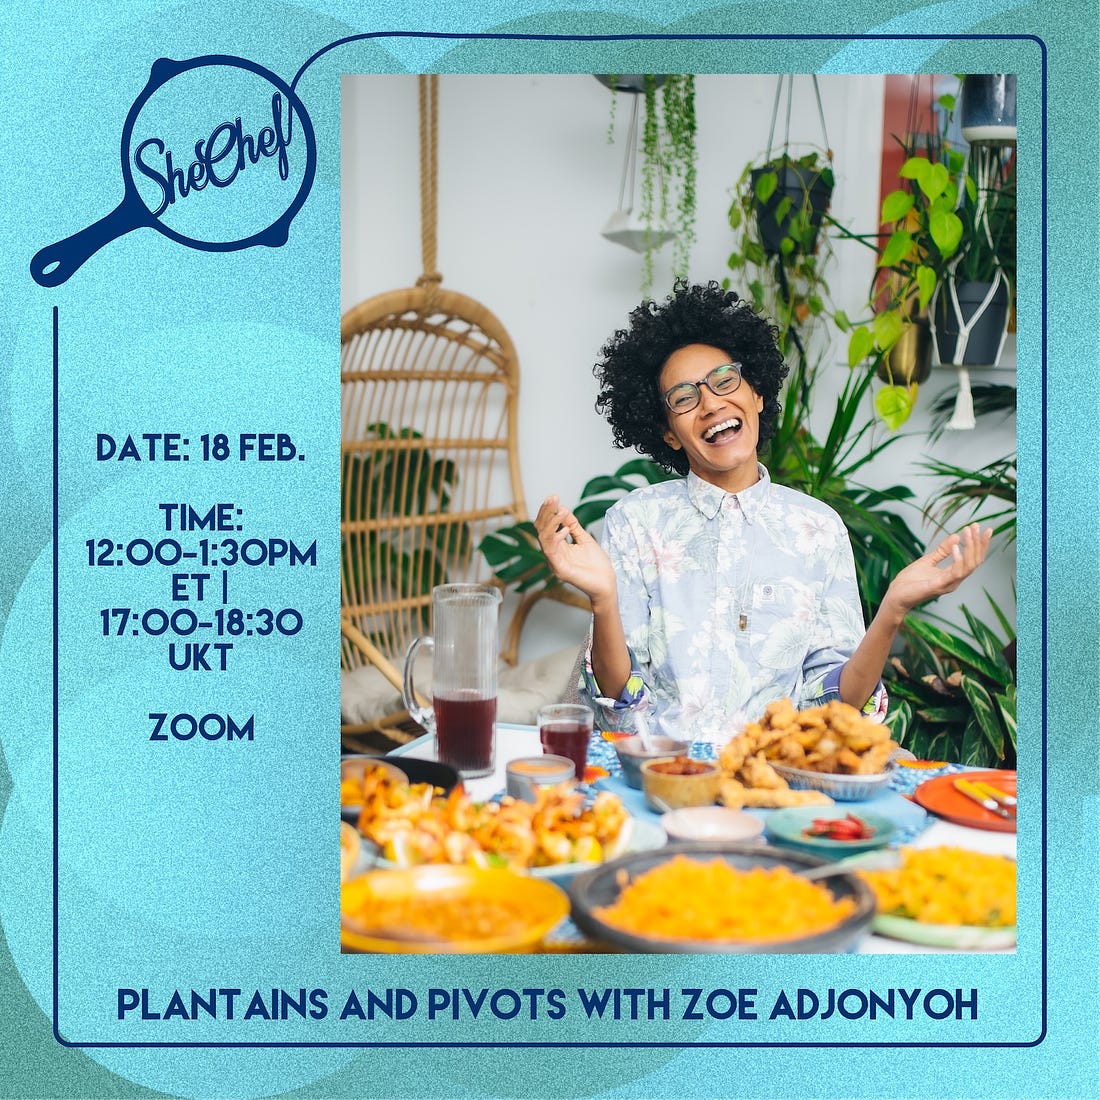 SheChef, virtual event series “Plantains and Pivots with Zoe Adjonyoh”